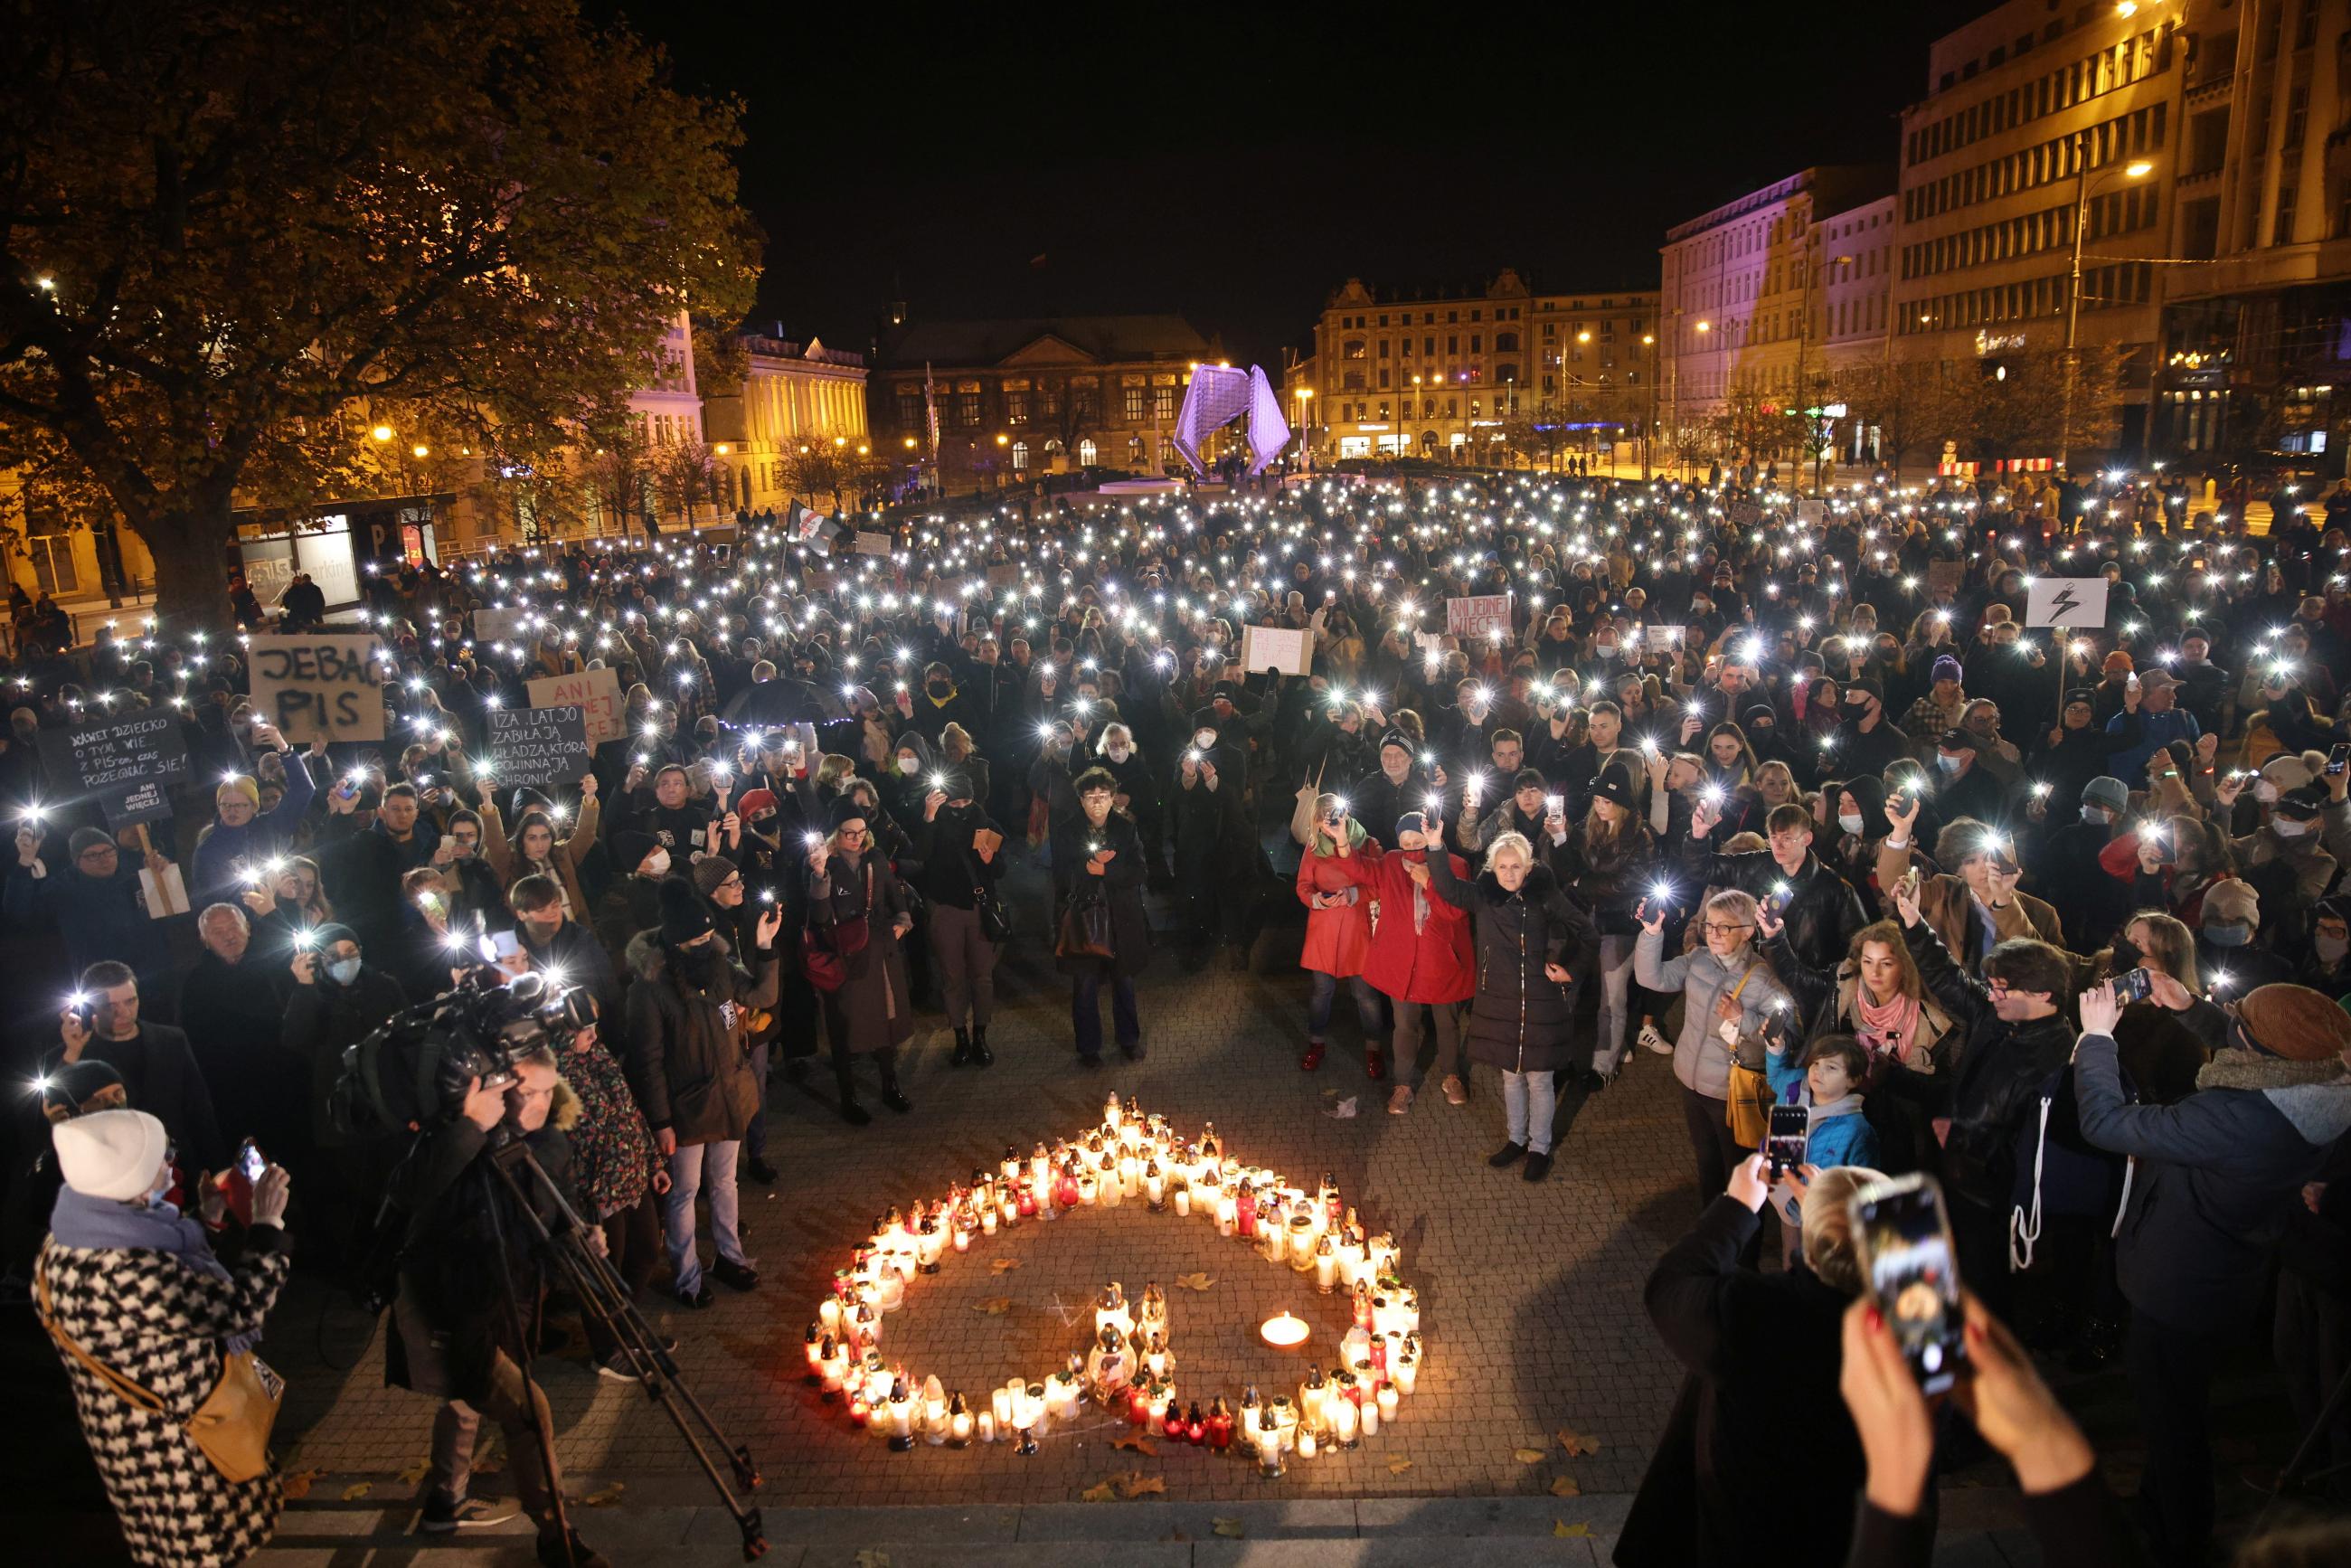 A large crowd of people hold lighted cell-phones at night in a vigil for Izabela, a woman who died after being refused abortion care. On the ground in front of them is a formation of red and white candles in the shape of a heart.